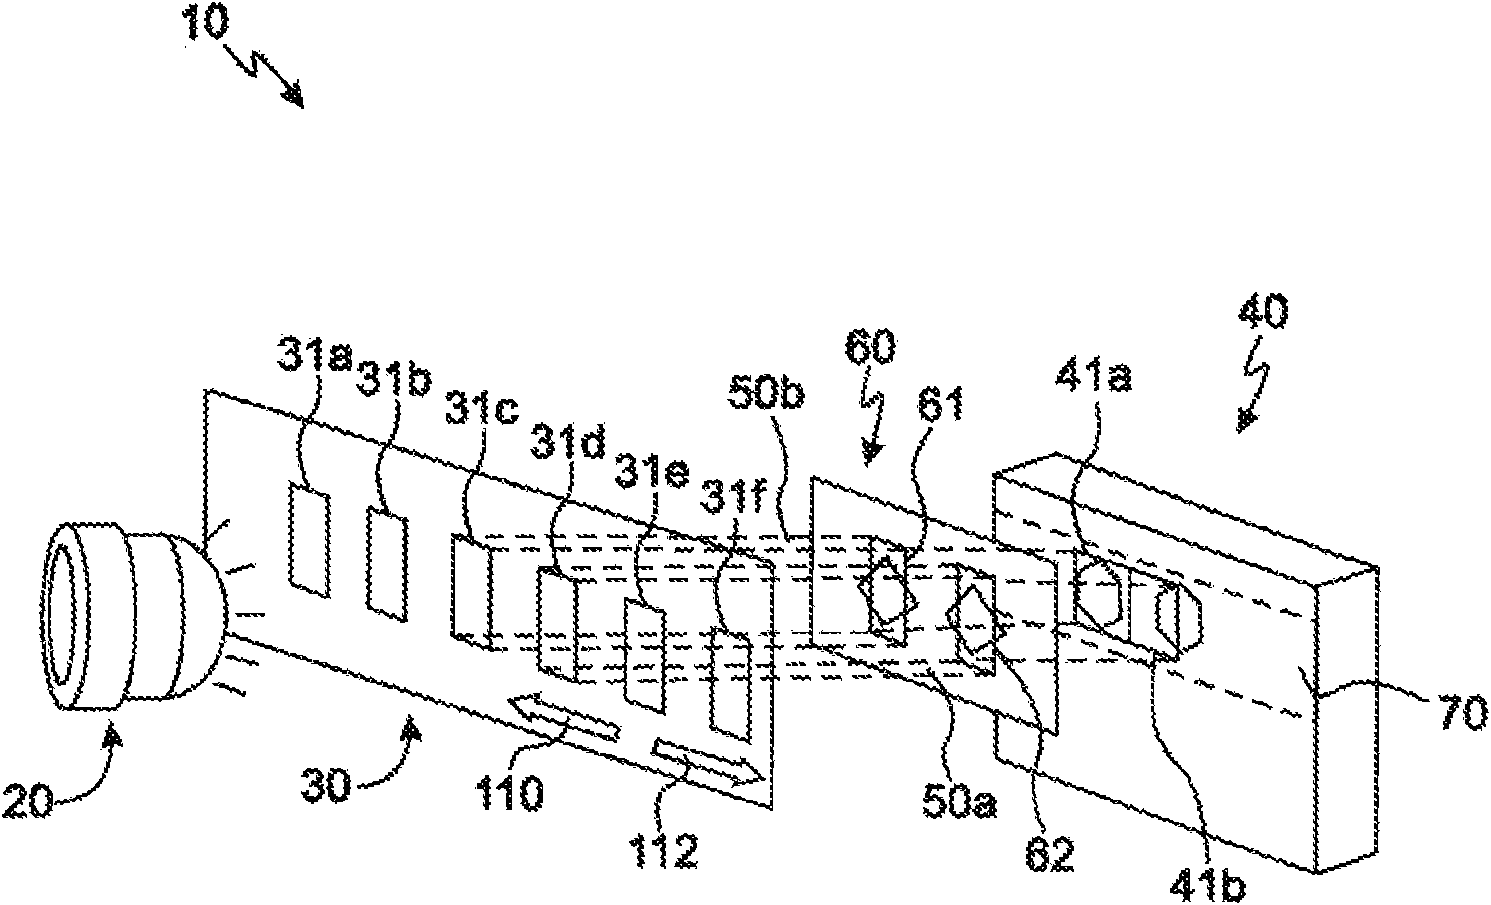 High resolution optical encoder systems, devices and methods